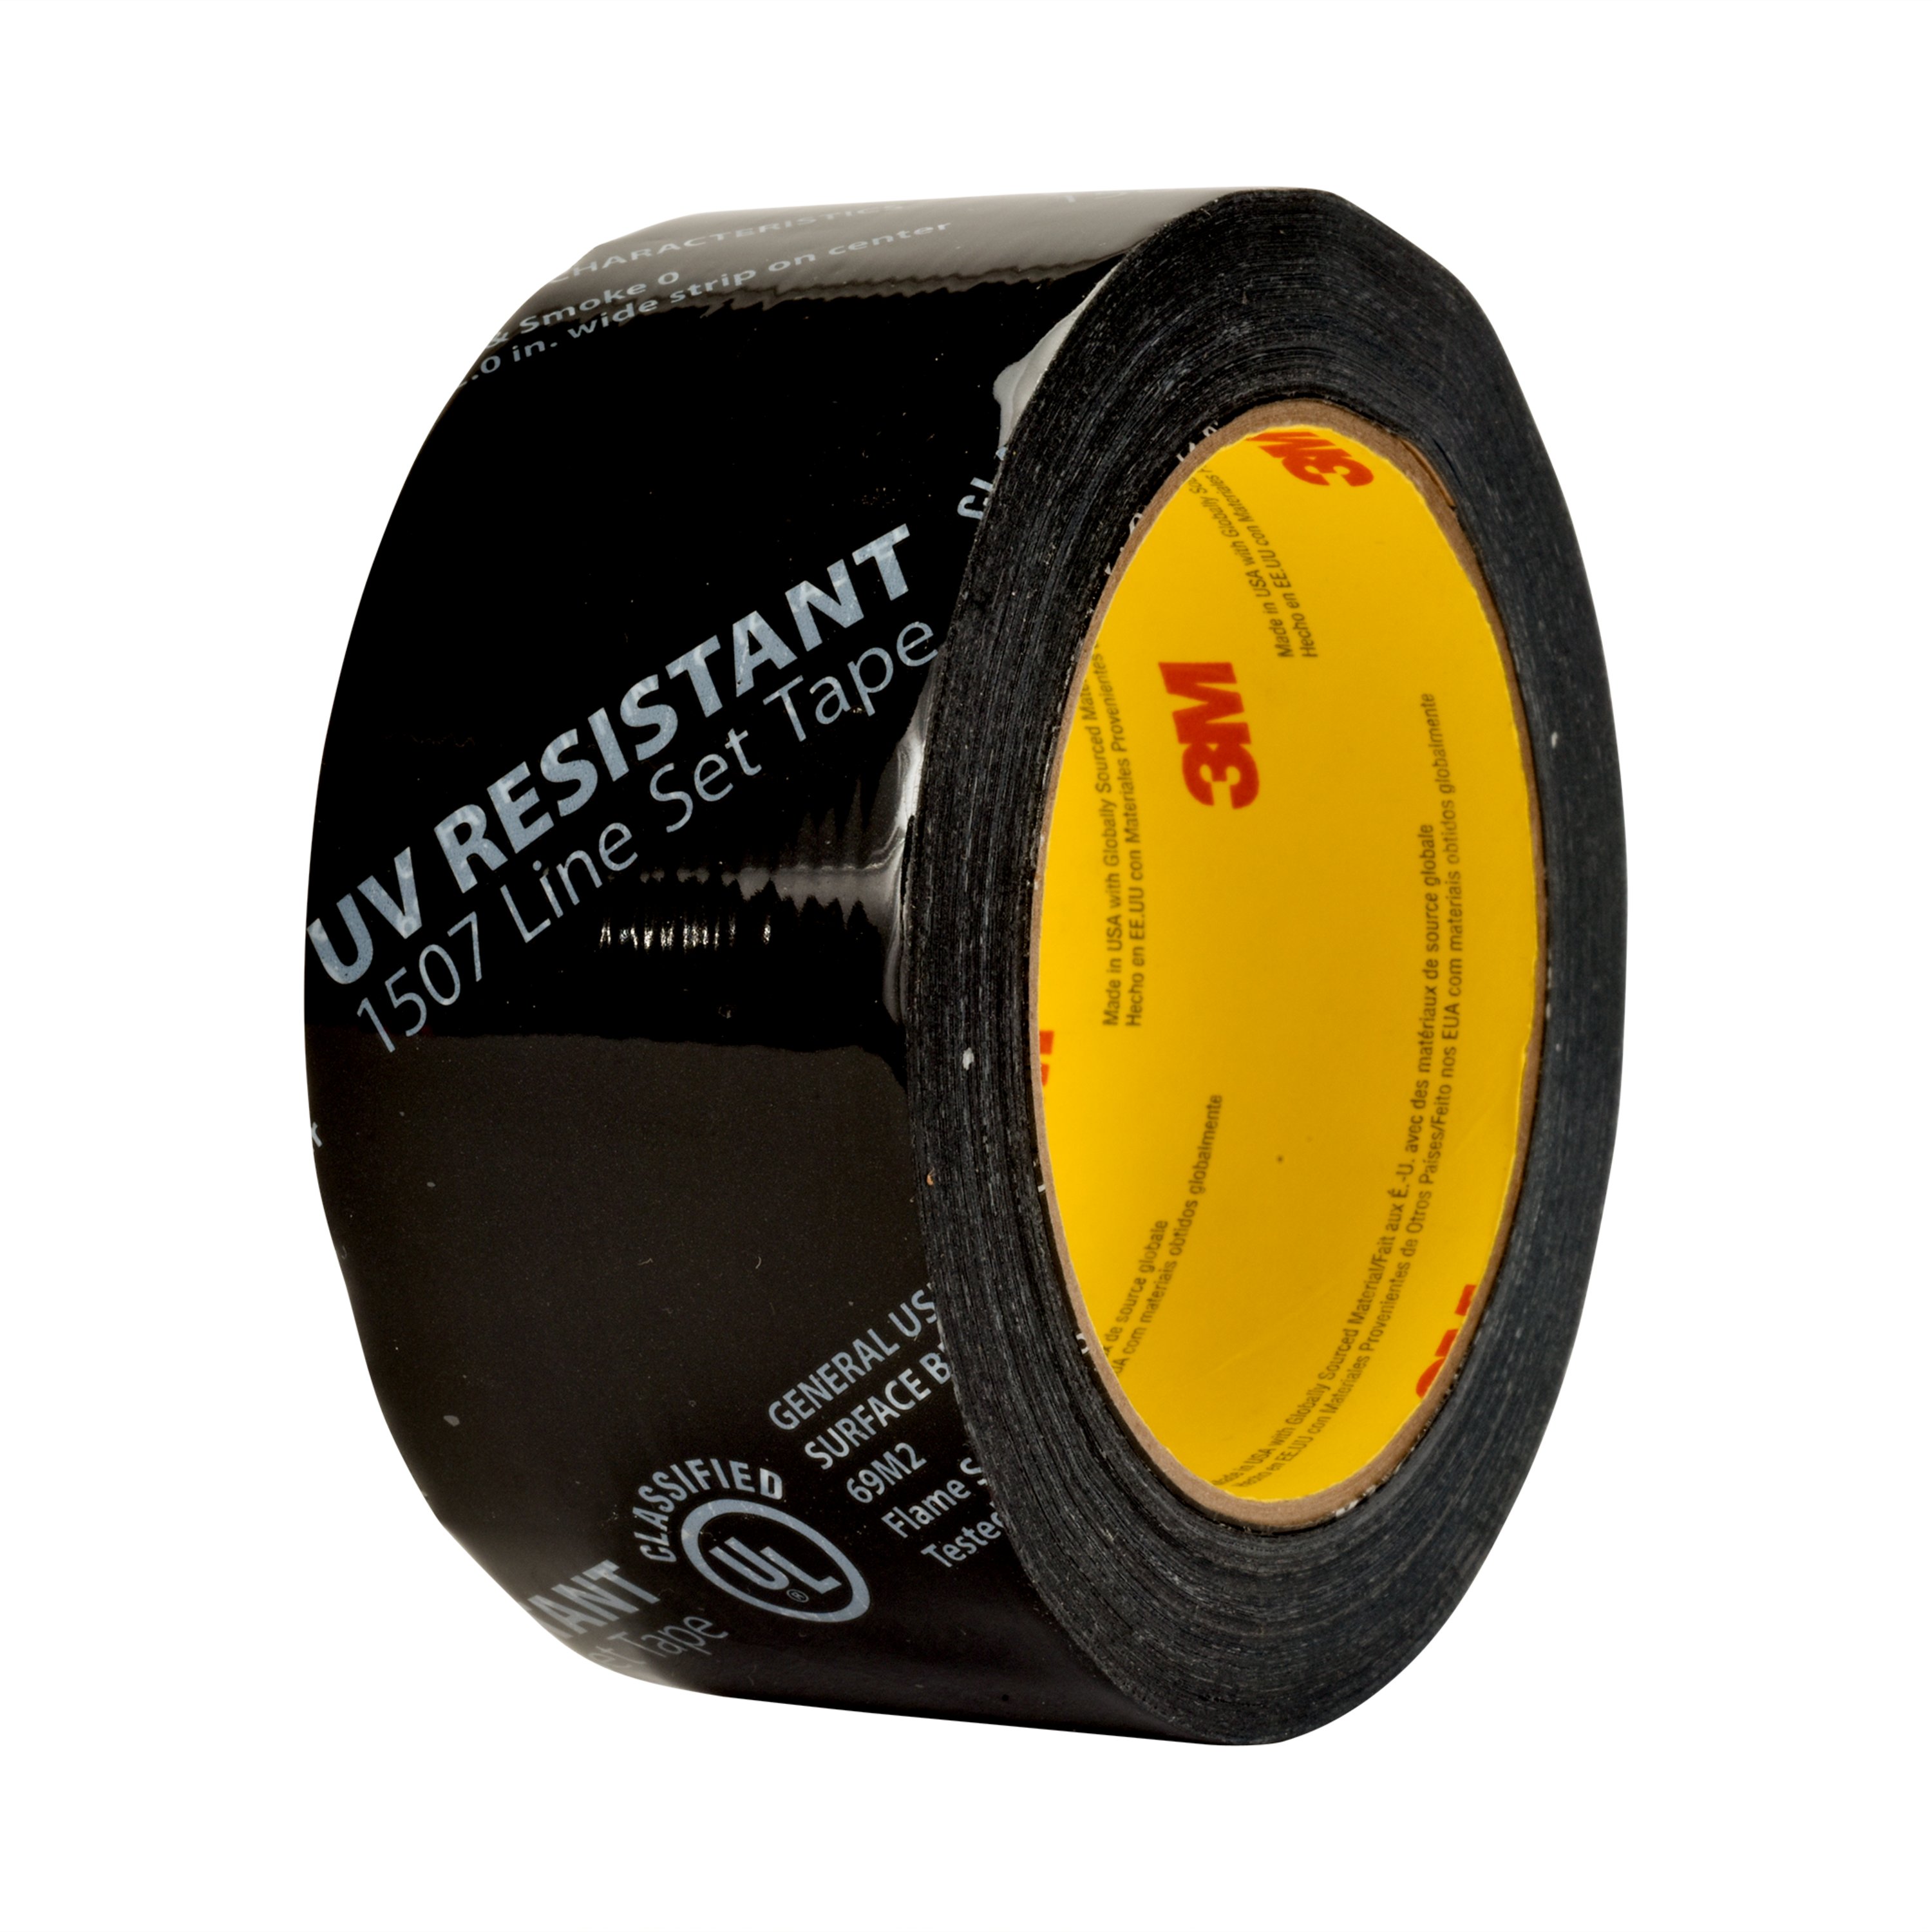 3M Double-Sided Paper Tape [Rubber Adhesive] (410M): 2 in. x 36 yds.  (Off-White)